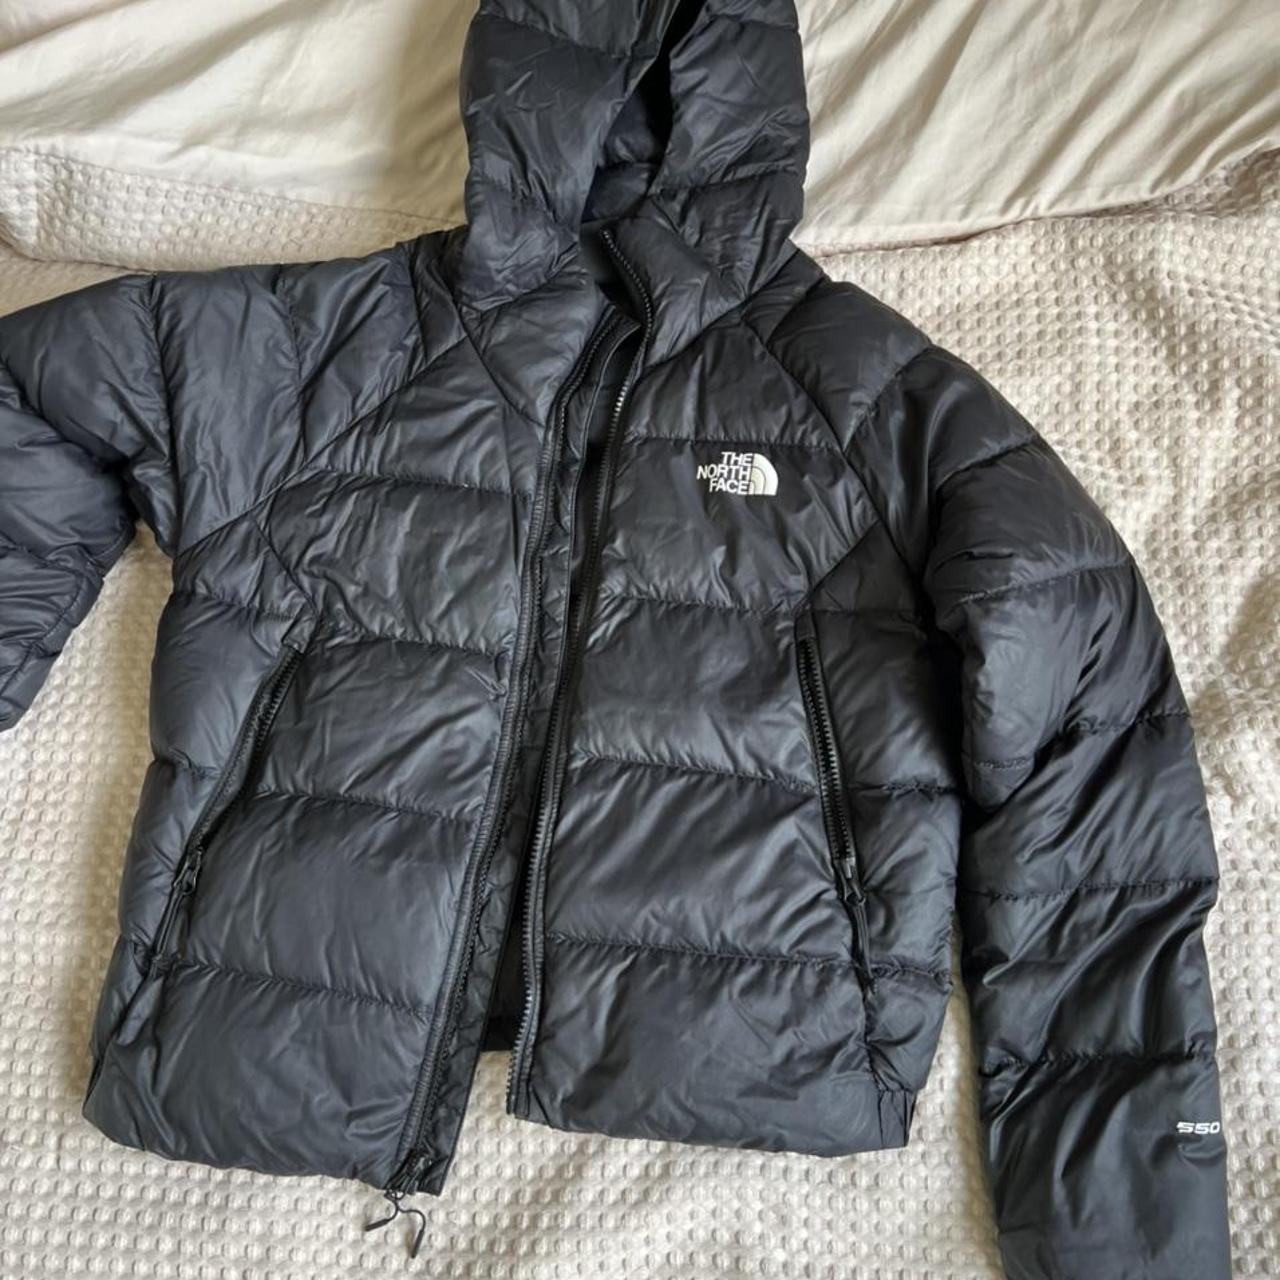 Good condition but on back of coat the north face... - Depop